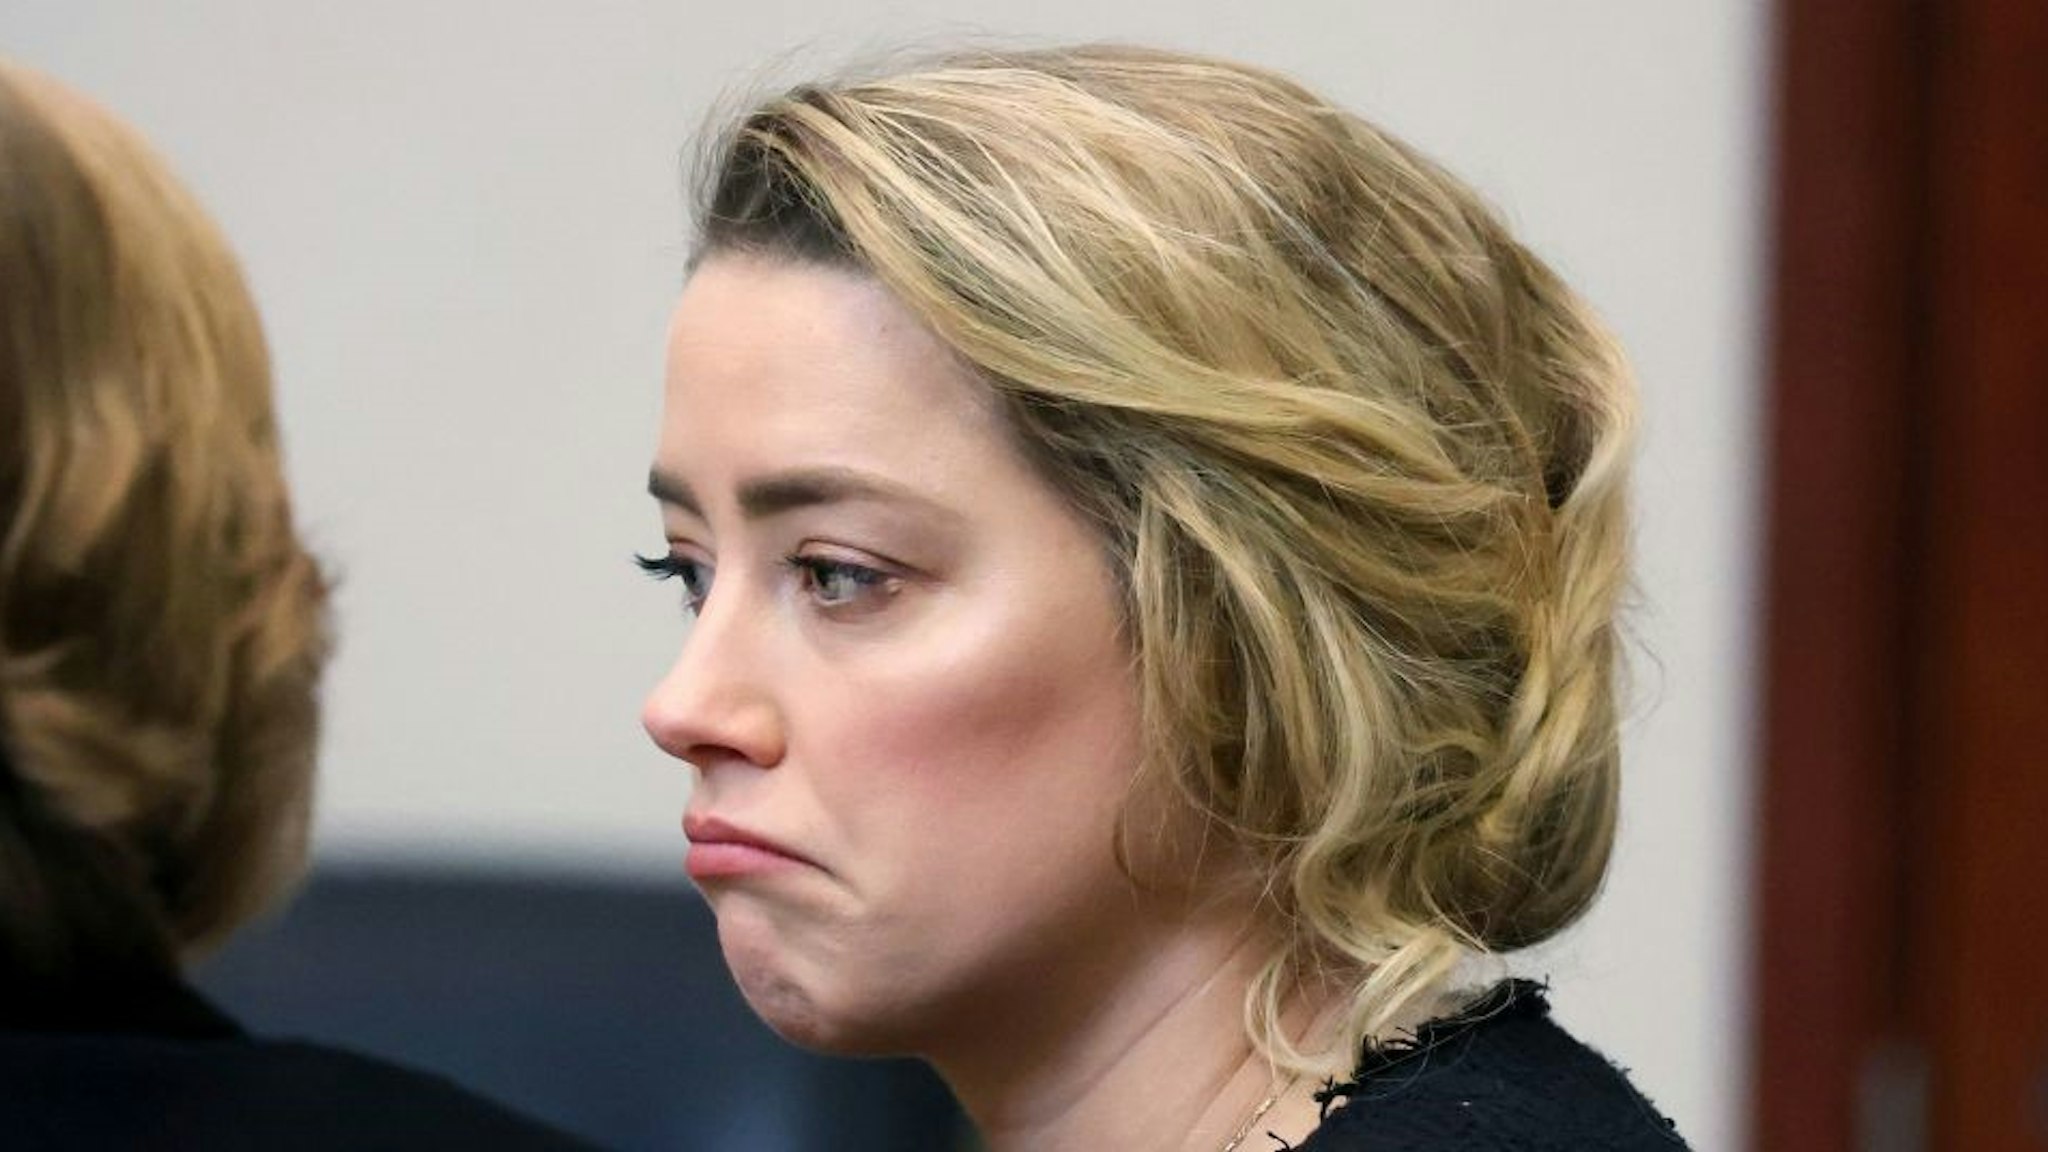 US actress Amber Heard during the 50 million US dollar Depp vs Heard defamation trial at the Fairfax County Circuit Court in Fairfax, Virginia, on April 28, 2022. - US actor Johnny Depp sued his ex-wife Amber Heard for libel in Fairfax County Circuit Court after she wrote an op-ed piece in The Washington Post in 2018 referring to herself as a "public figure representing domestic abuse." (Photo by Michael REYNOLDS / POOL / AFP) (Photo by